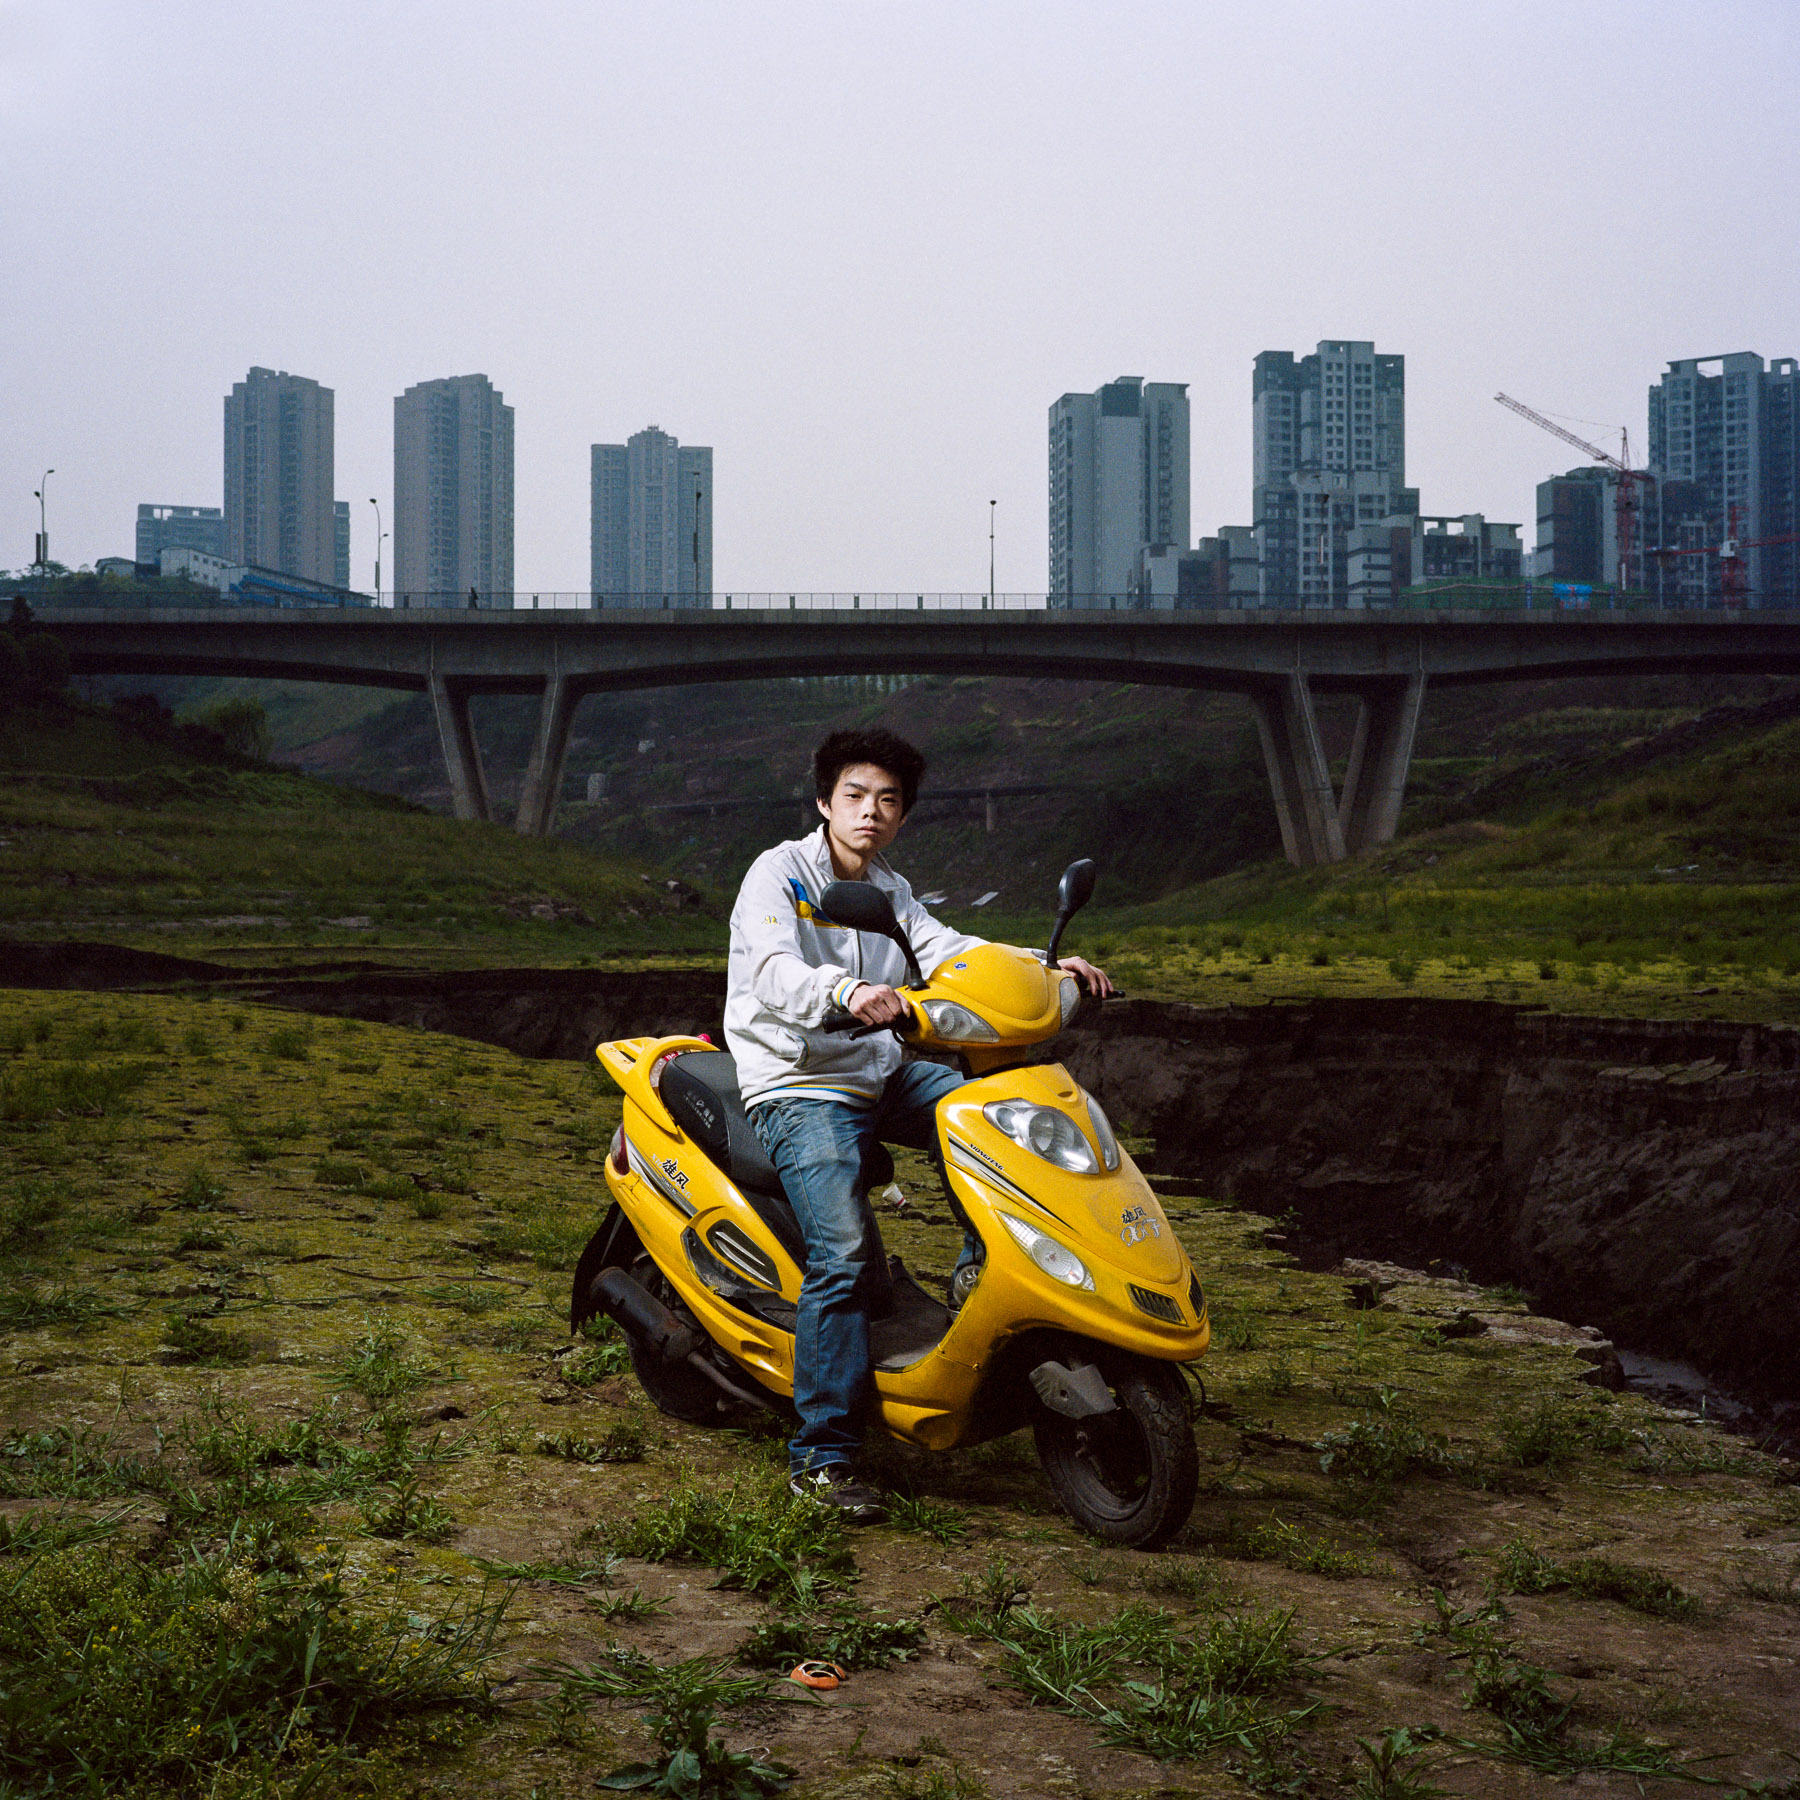  Chongqing, China. 2013. Chongqing is a major city in the Southwest of China and one of the five national central cities in the PRC. It is one of PRC's four direct-controlled municipalities and was created as such in 1997. It has a population of 28 m